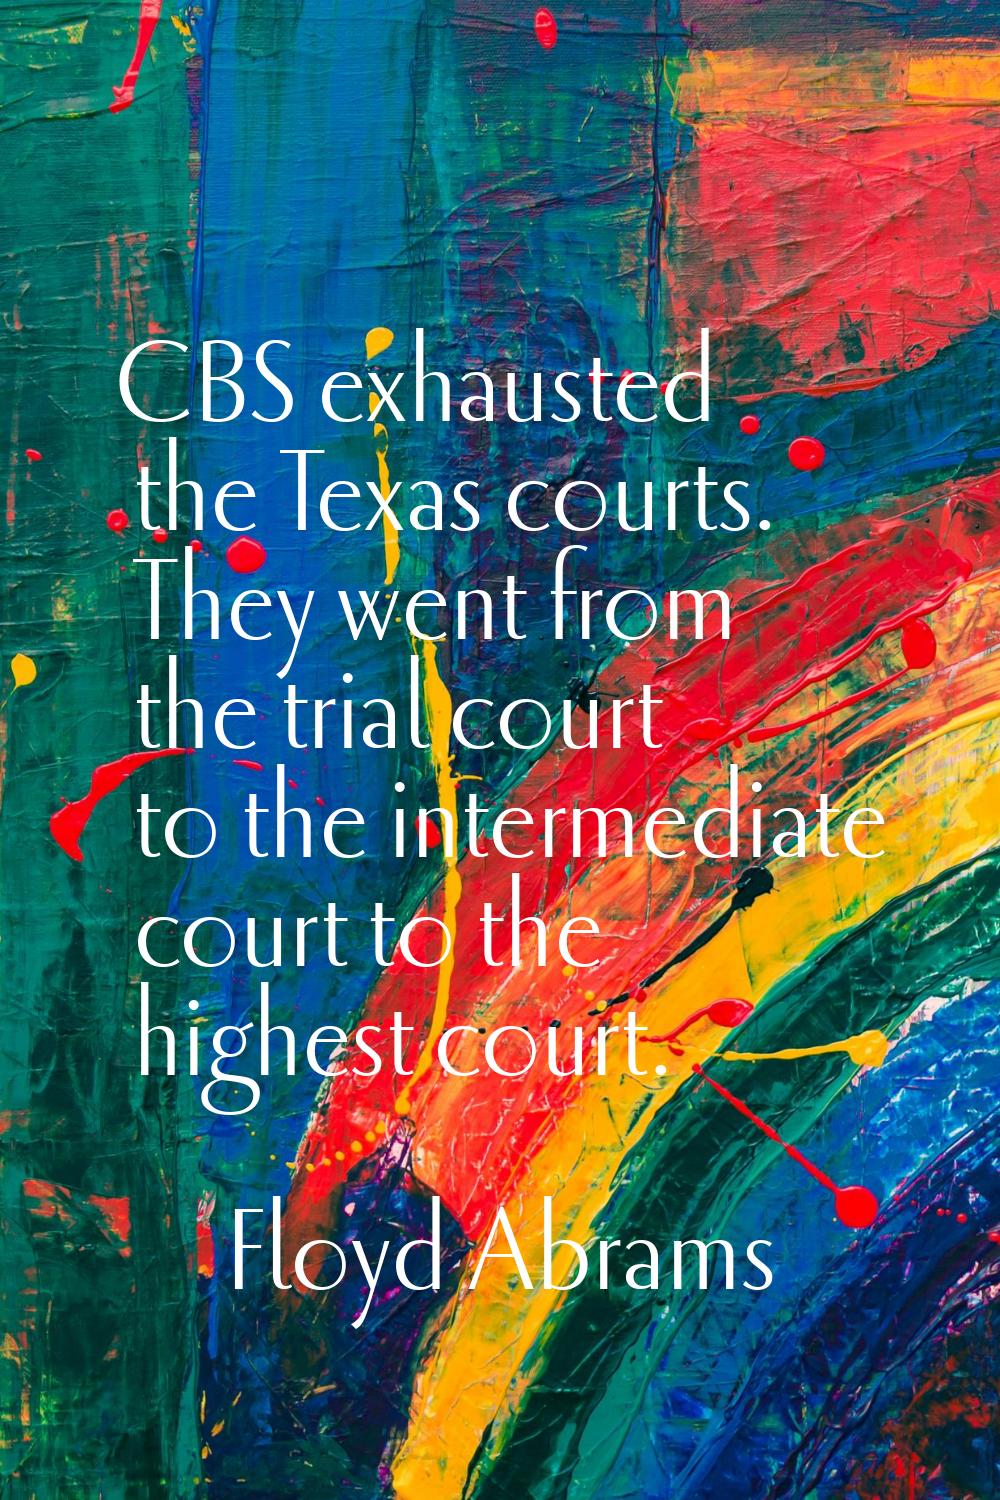 CBS exhausted the Texas courts. They went from the trial court to the intermediate court to the hig